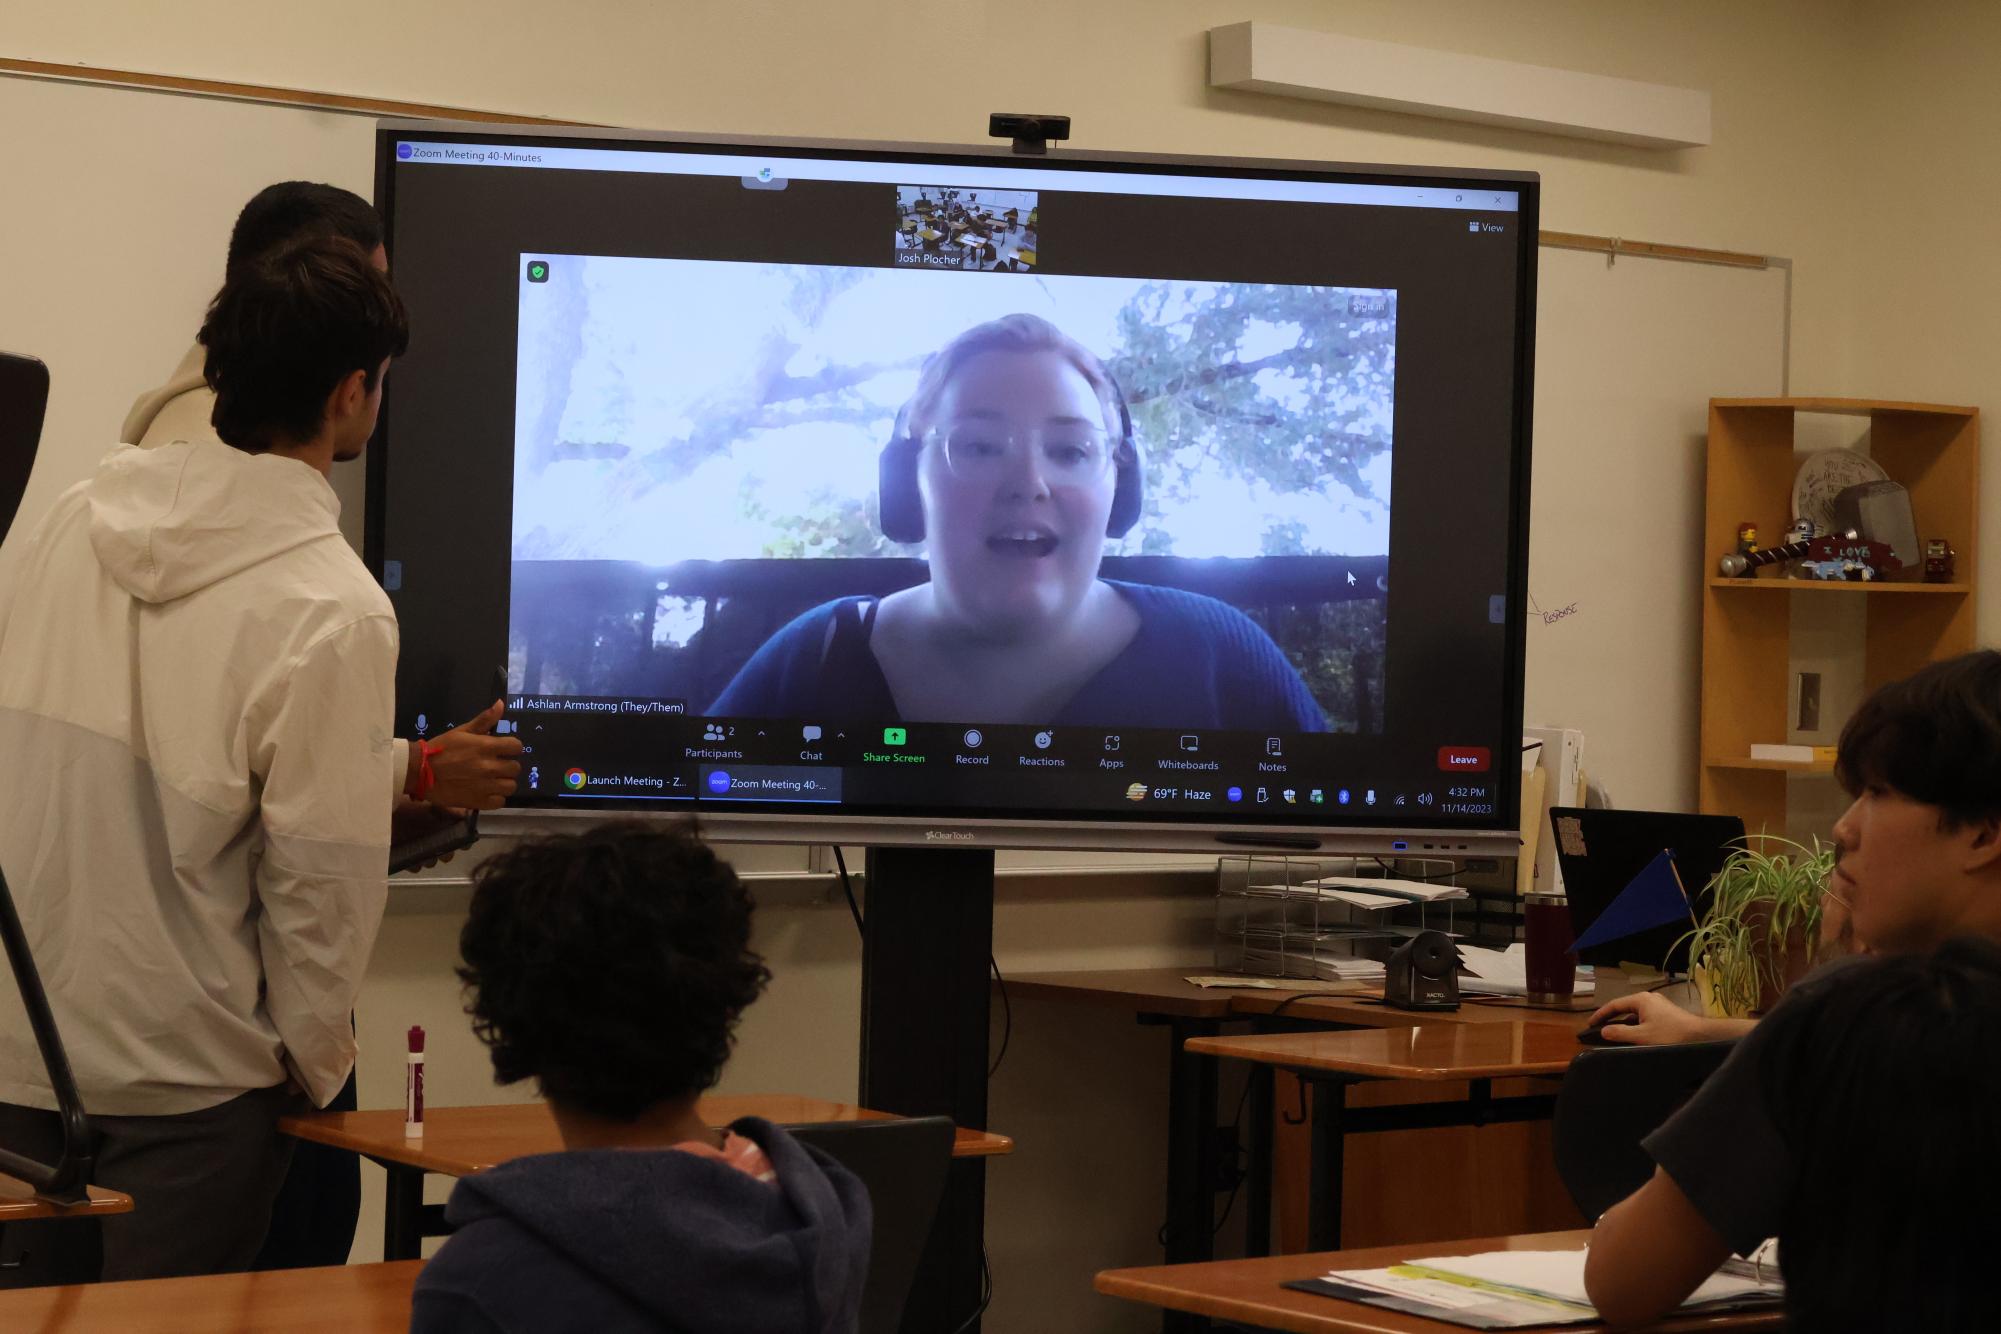 Through a Zoom call, Ashlan Armstrong joins Neurodiversity and Neuroscience Clubs meeting. Ms. Armstrong, who works at Greenleaf Neurodiversity Community Center, attended the meeting to educate students about neurodivergent individuals.